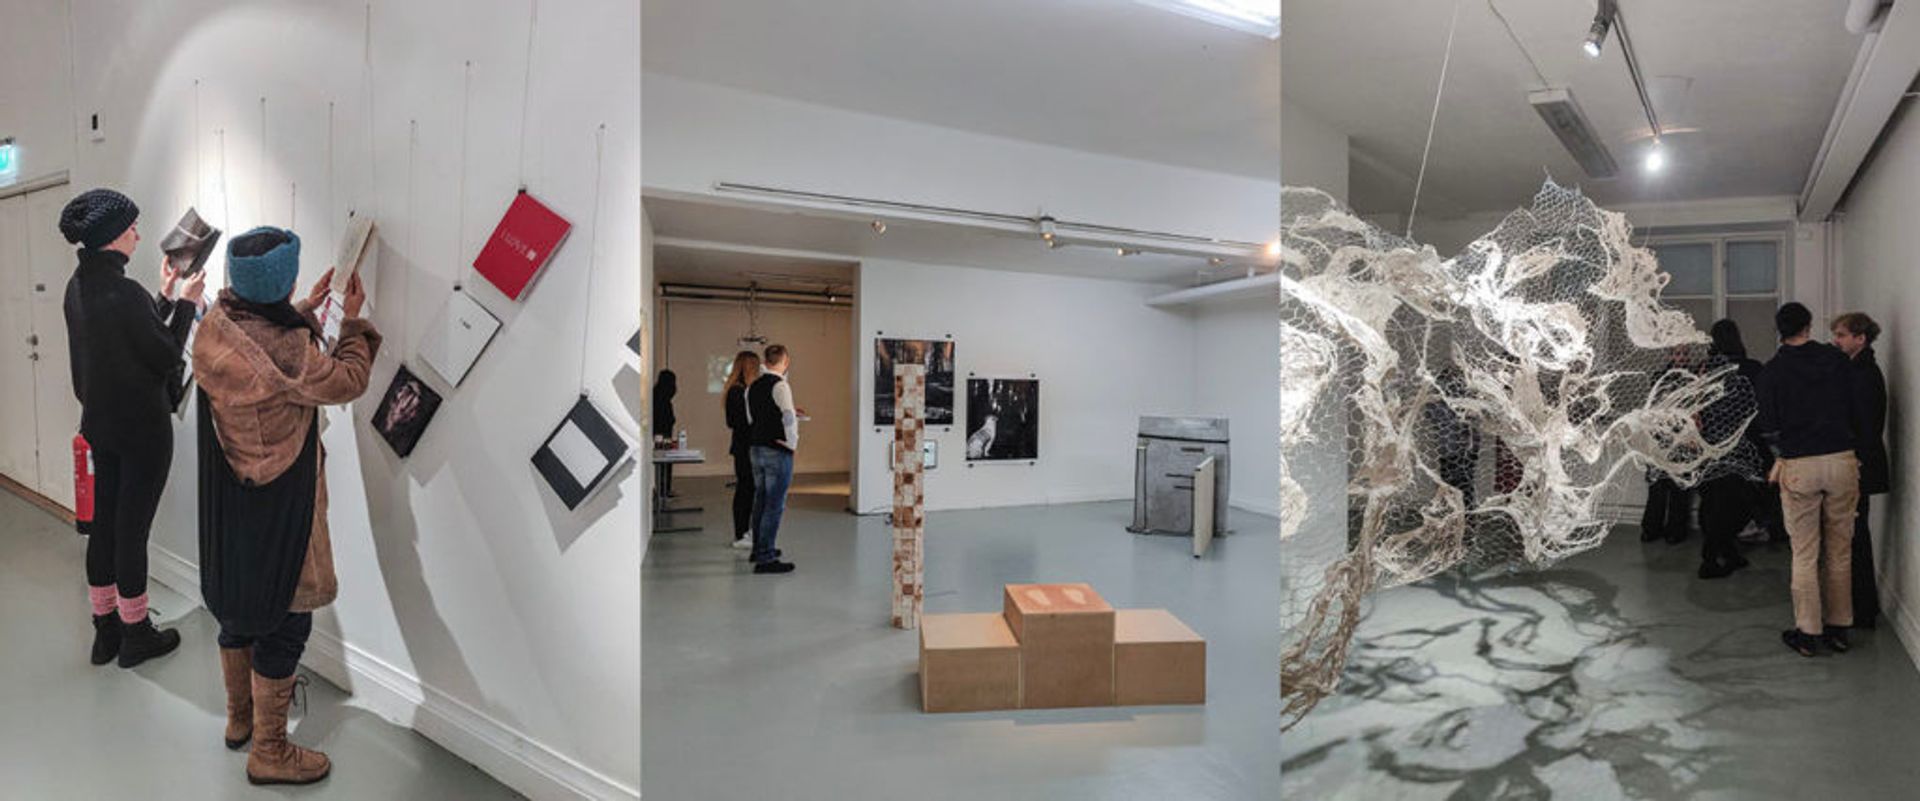 Some different installations from exhibitions at Valand Academy, University of Gothenburg